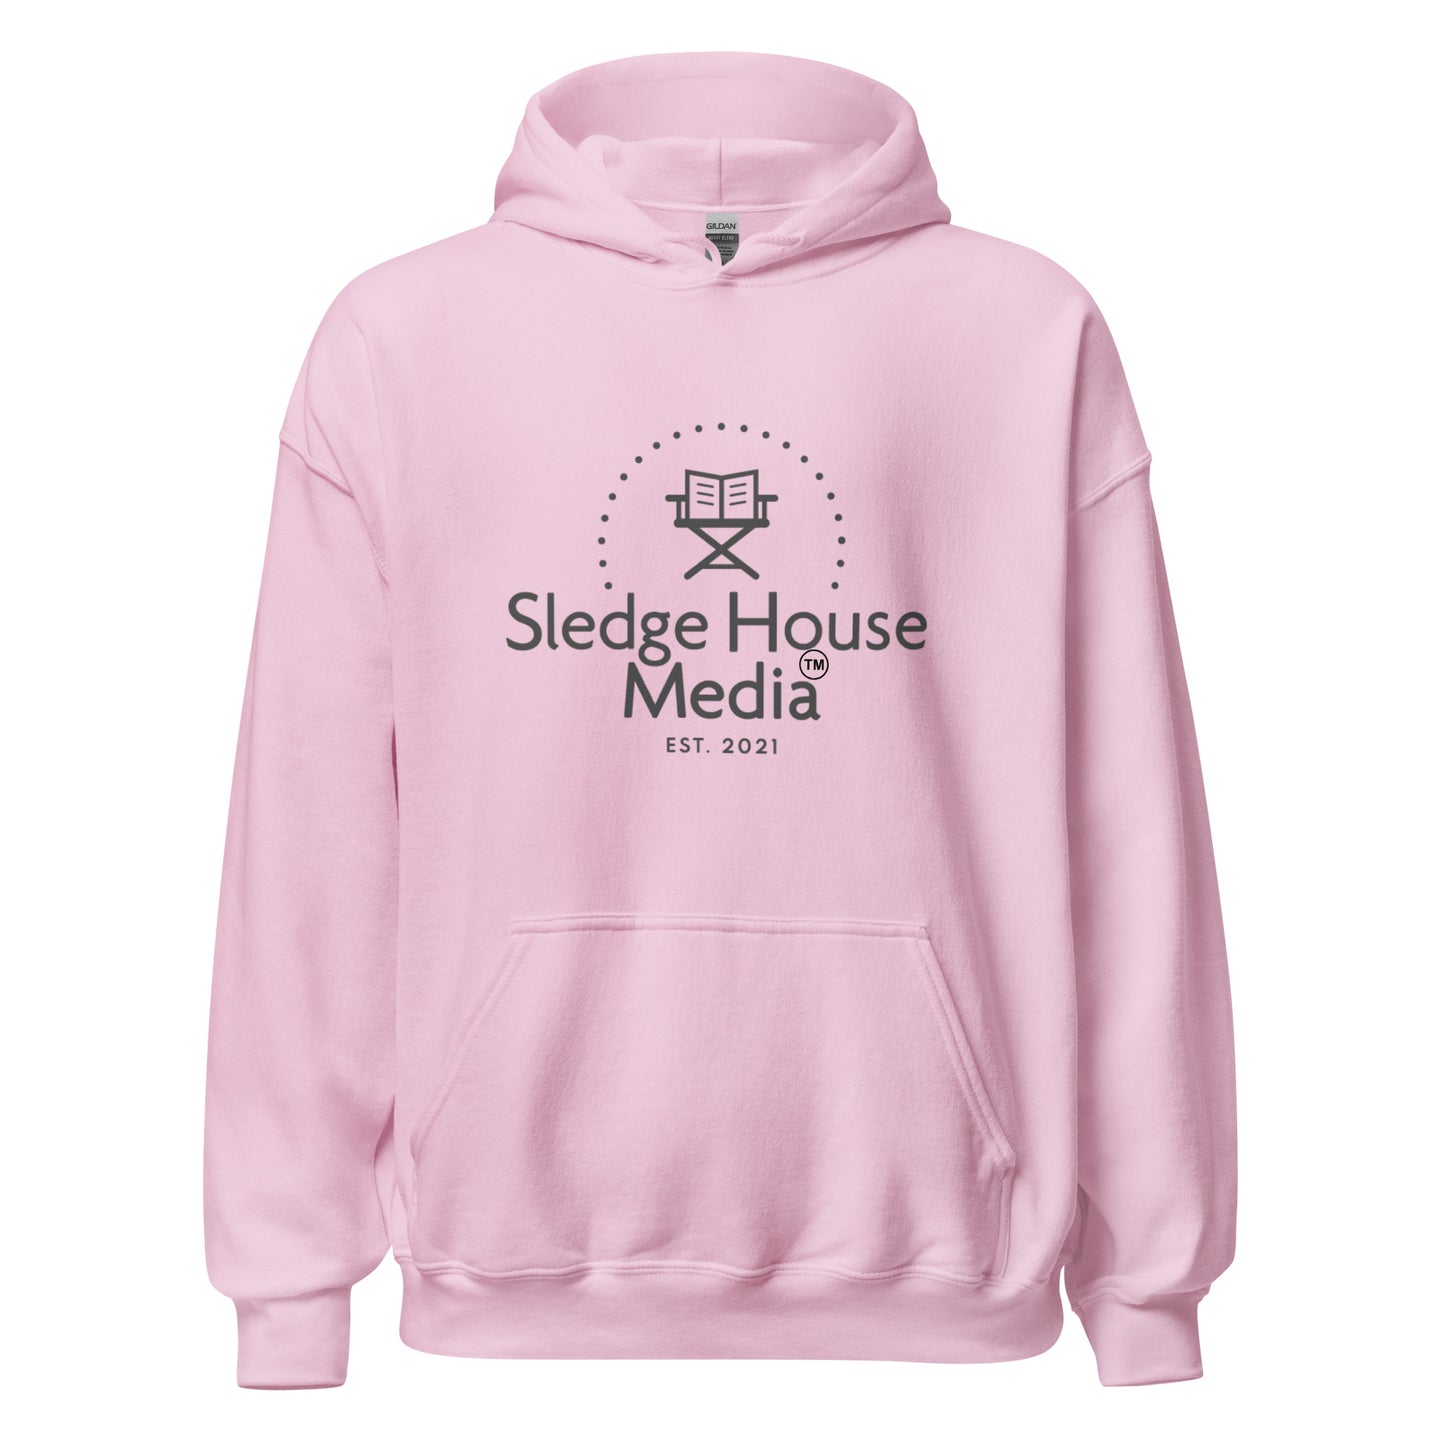 « The OG » Sledge House Media Every Day Sweat à capuche unisexe blanc ou rose confortable